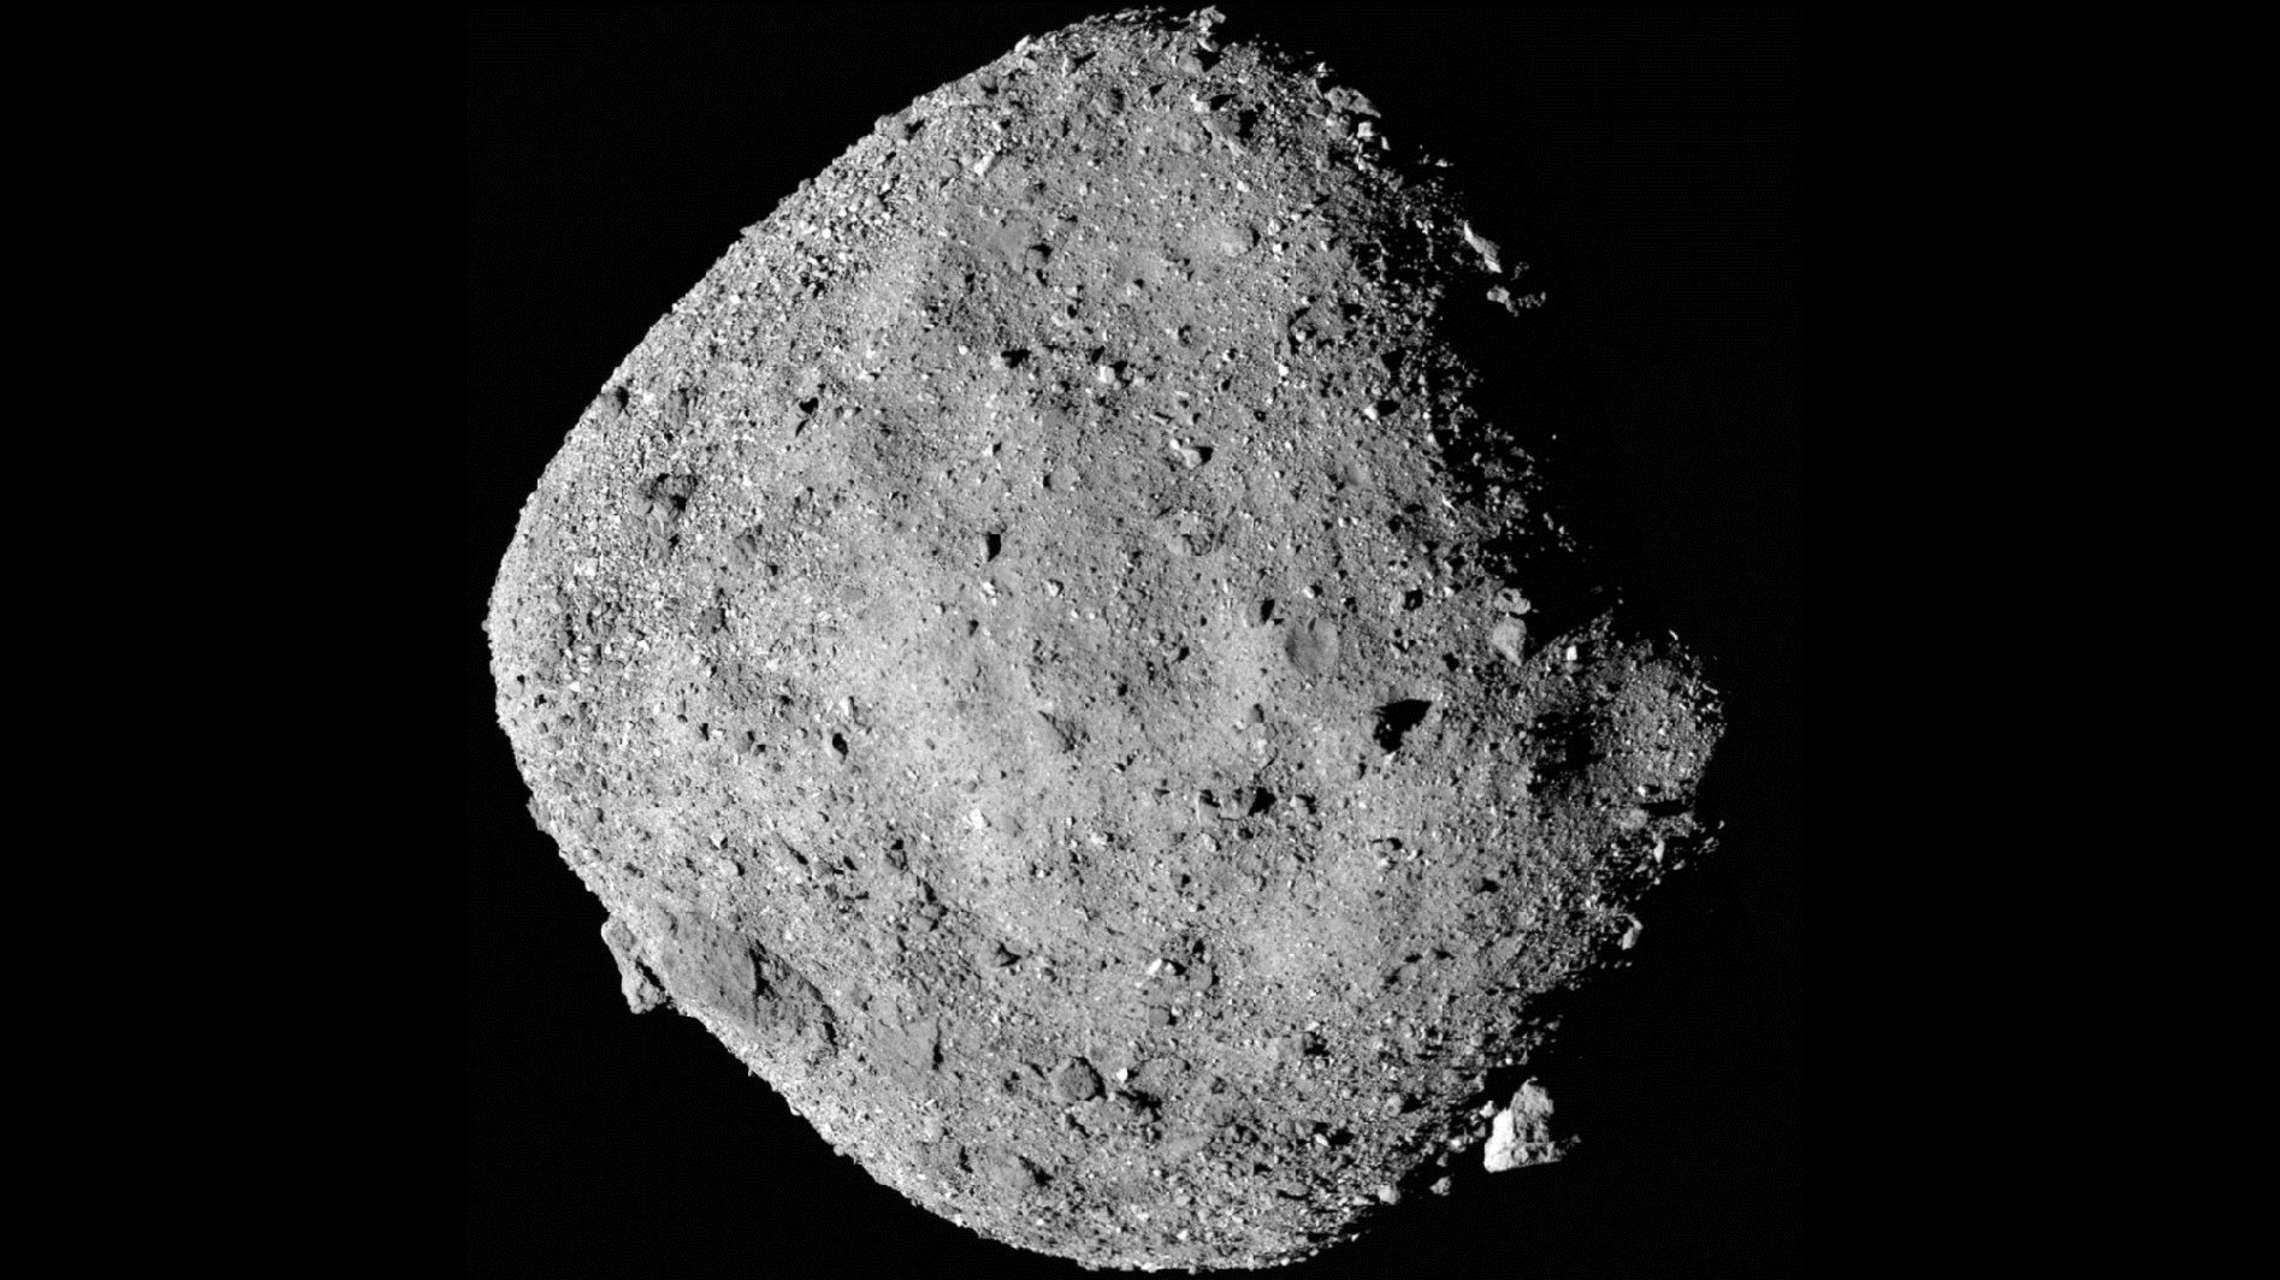 Why is the asteroid Bennu’s surface rocky and not smooth?